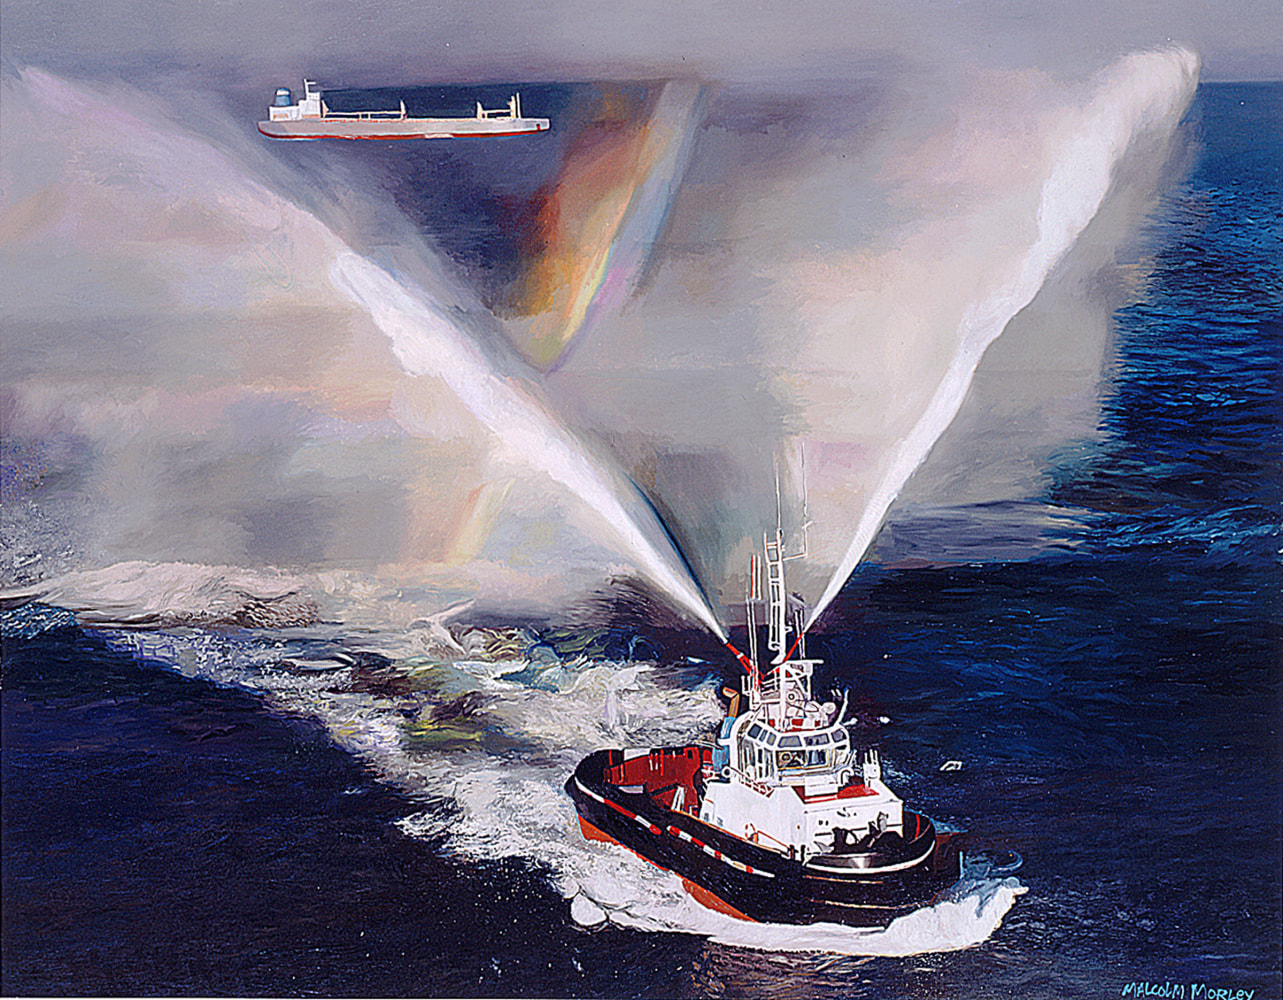 A tugboat spraying water creates a rainbow with a large freight ship in the distance